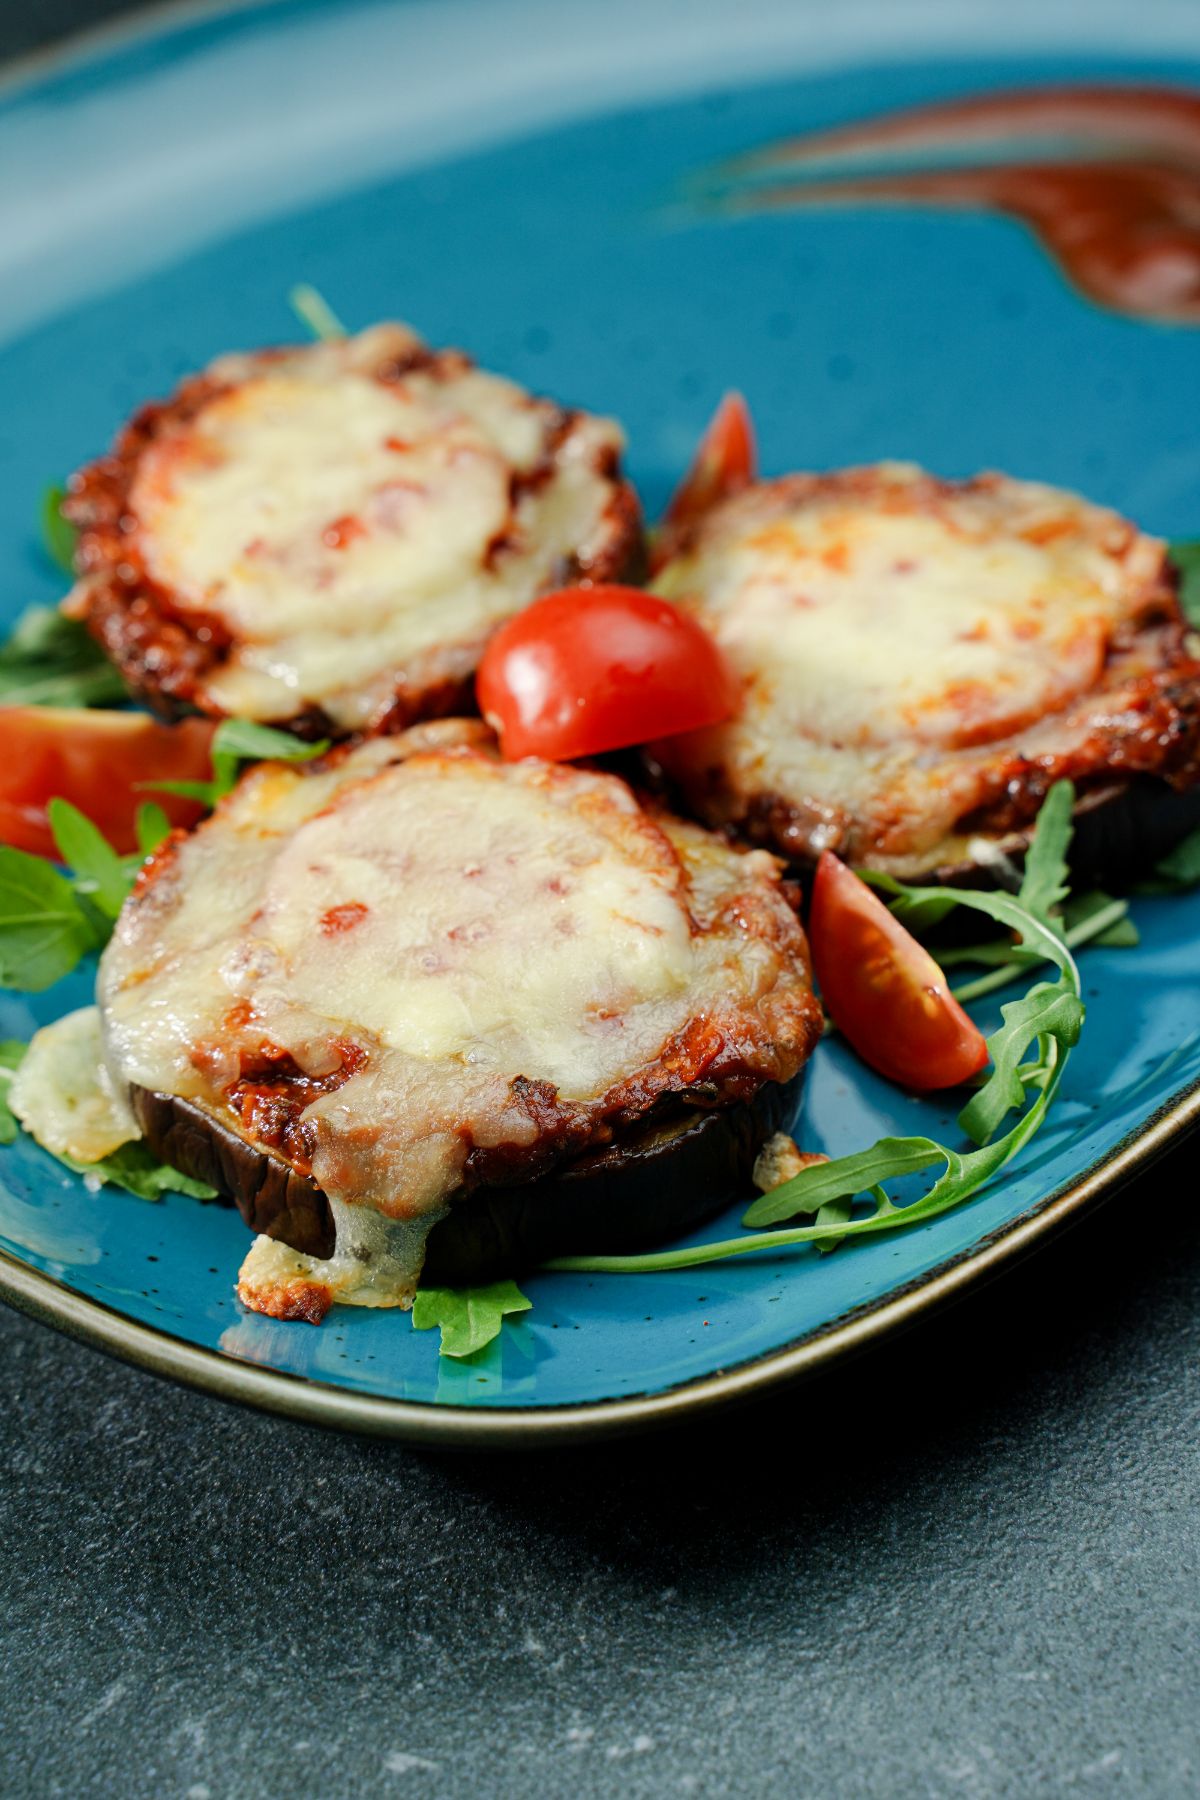 eggplant pizza bites with cheese on top sitting on teal plate